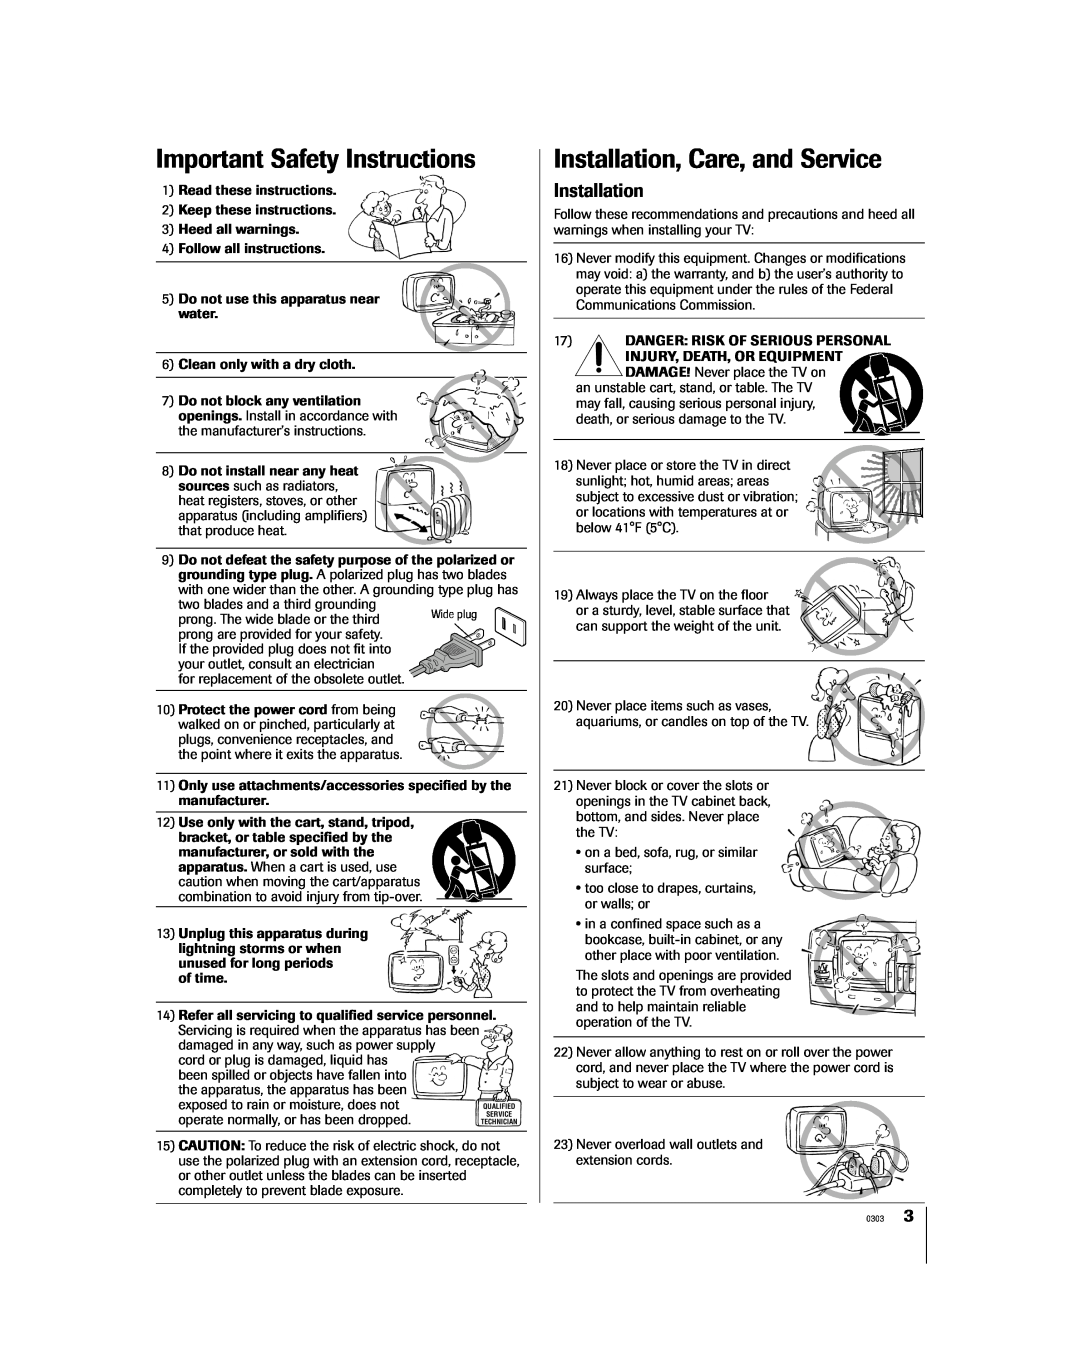 Toshiba 65H85C Important Safety Instructions, Installation, Care, and Service, the apparatus, the apparatus has been 